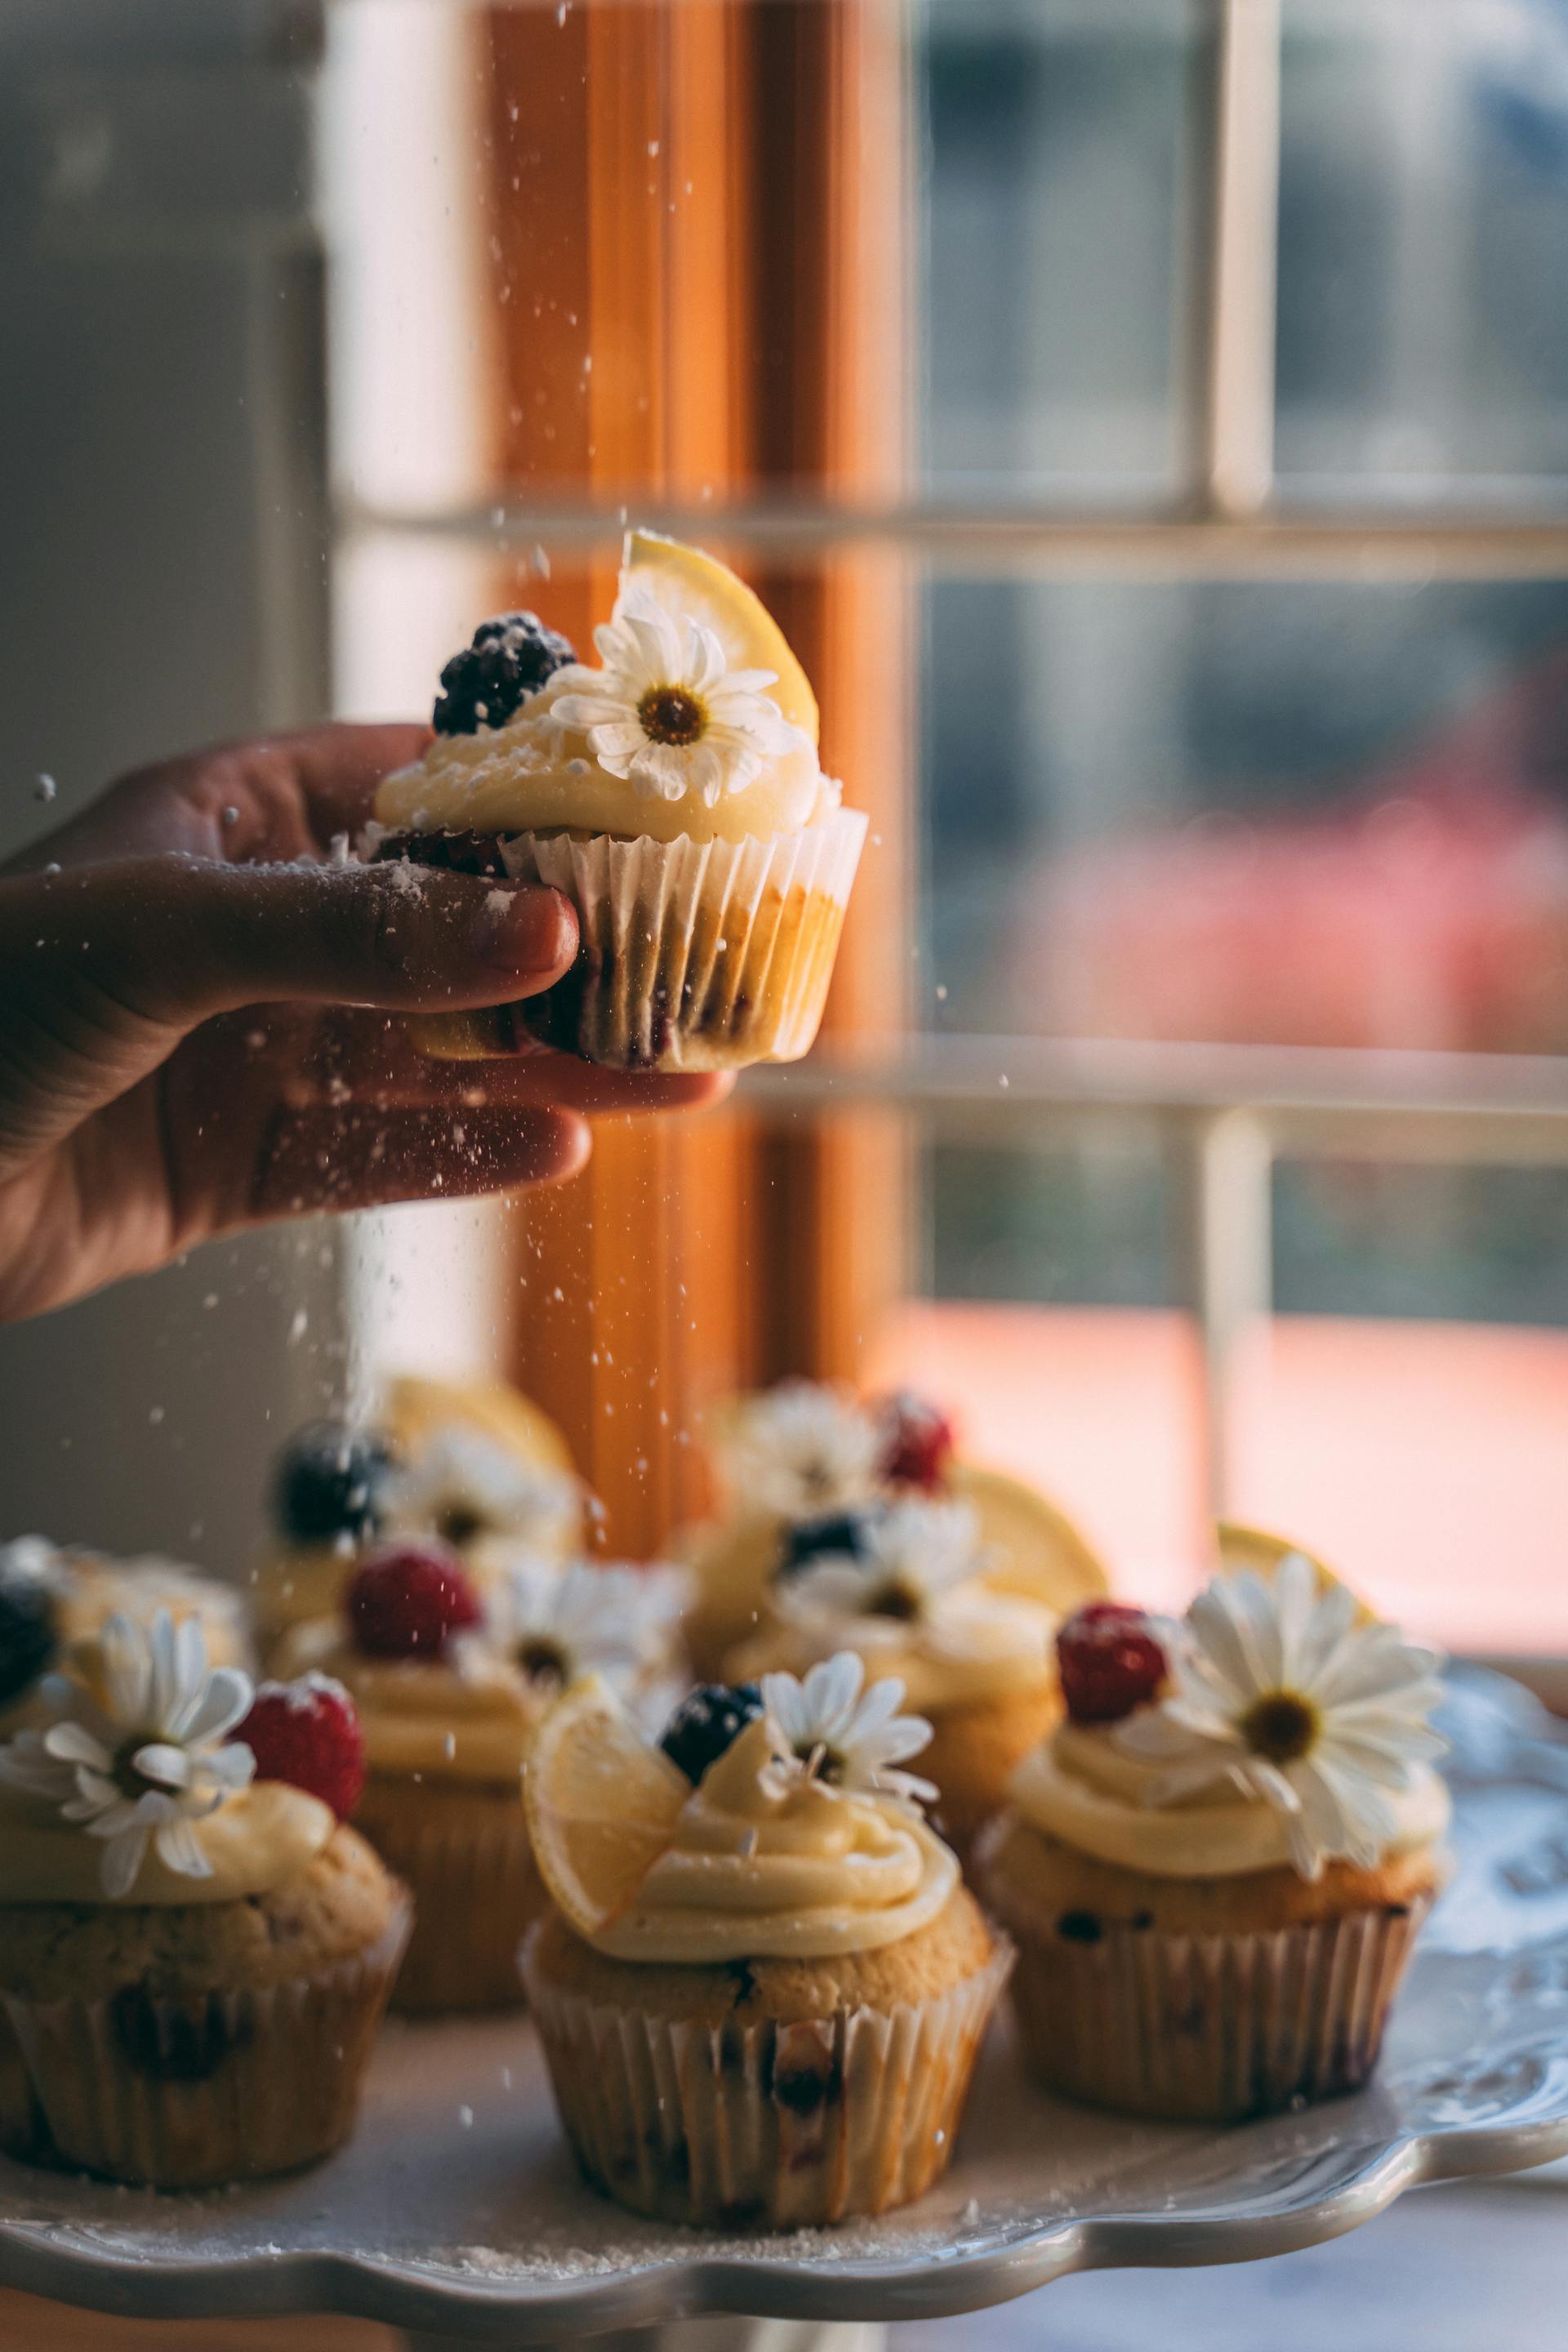 A person holding a cupcake | Source: Pexels